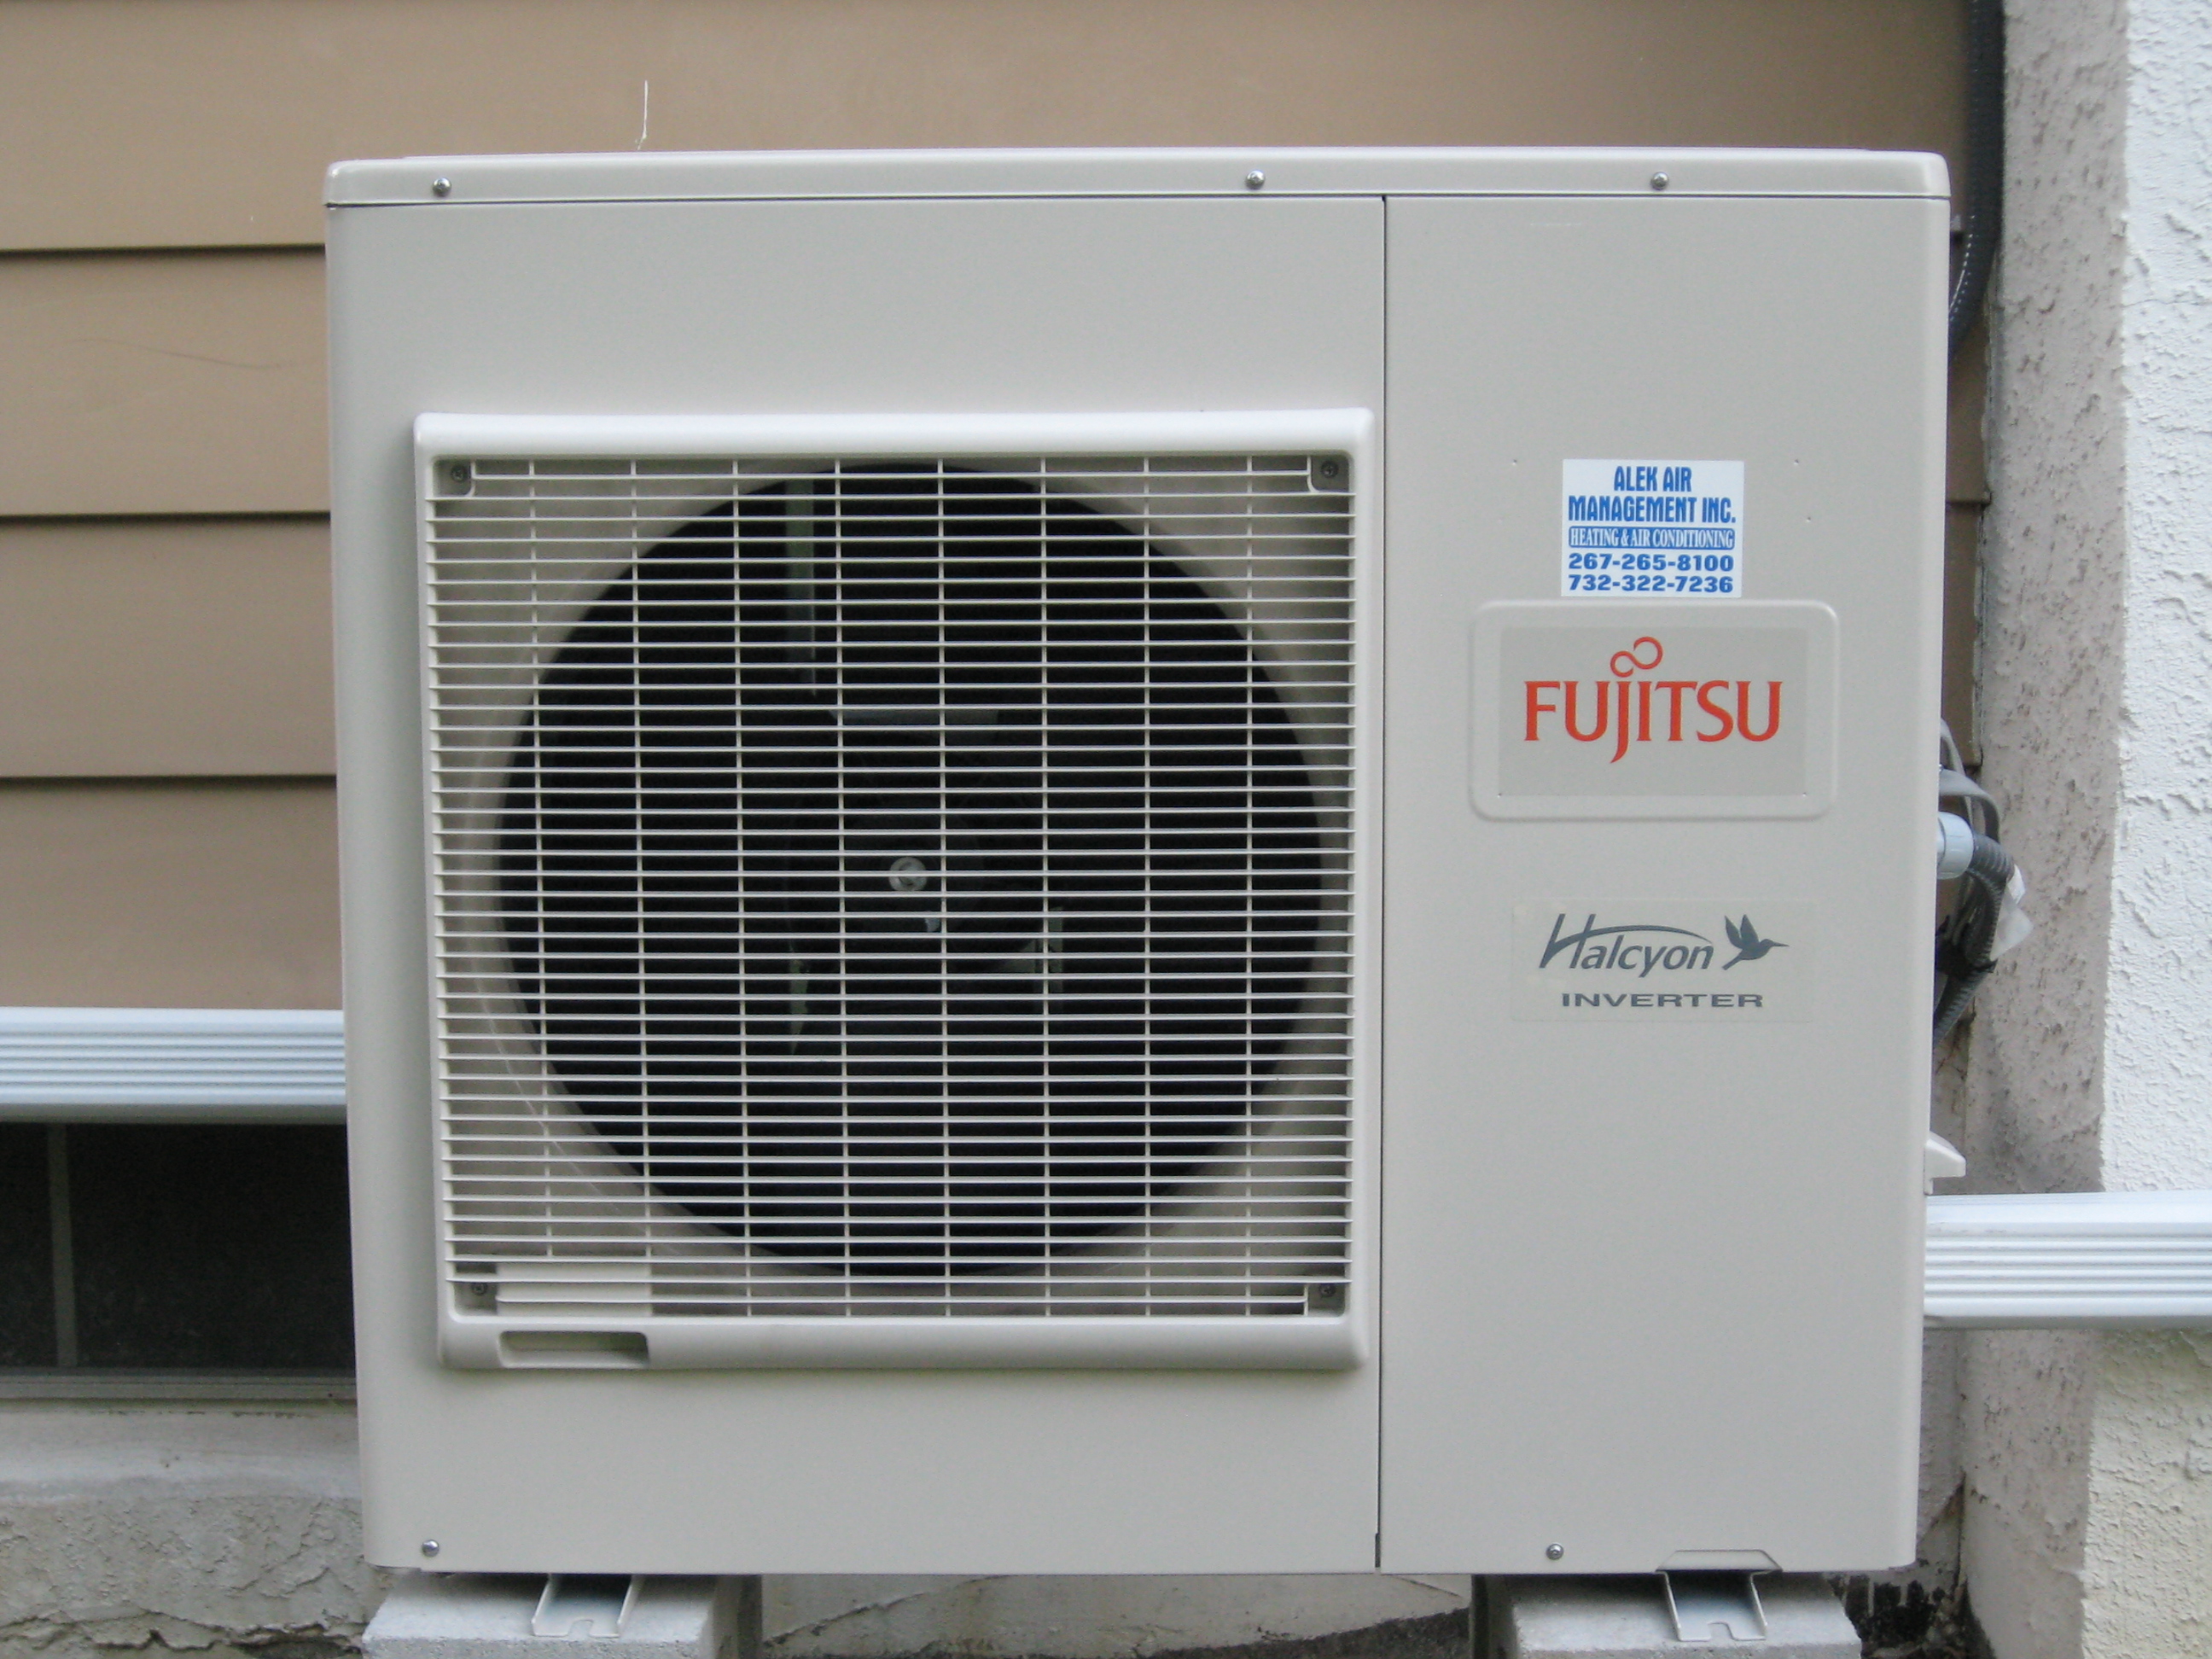 outdoor heating and cooling units